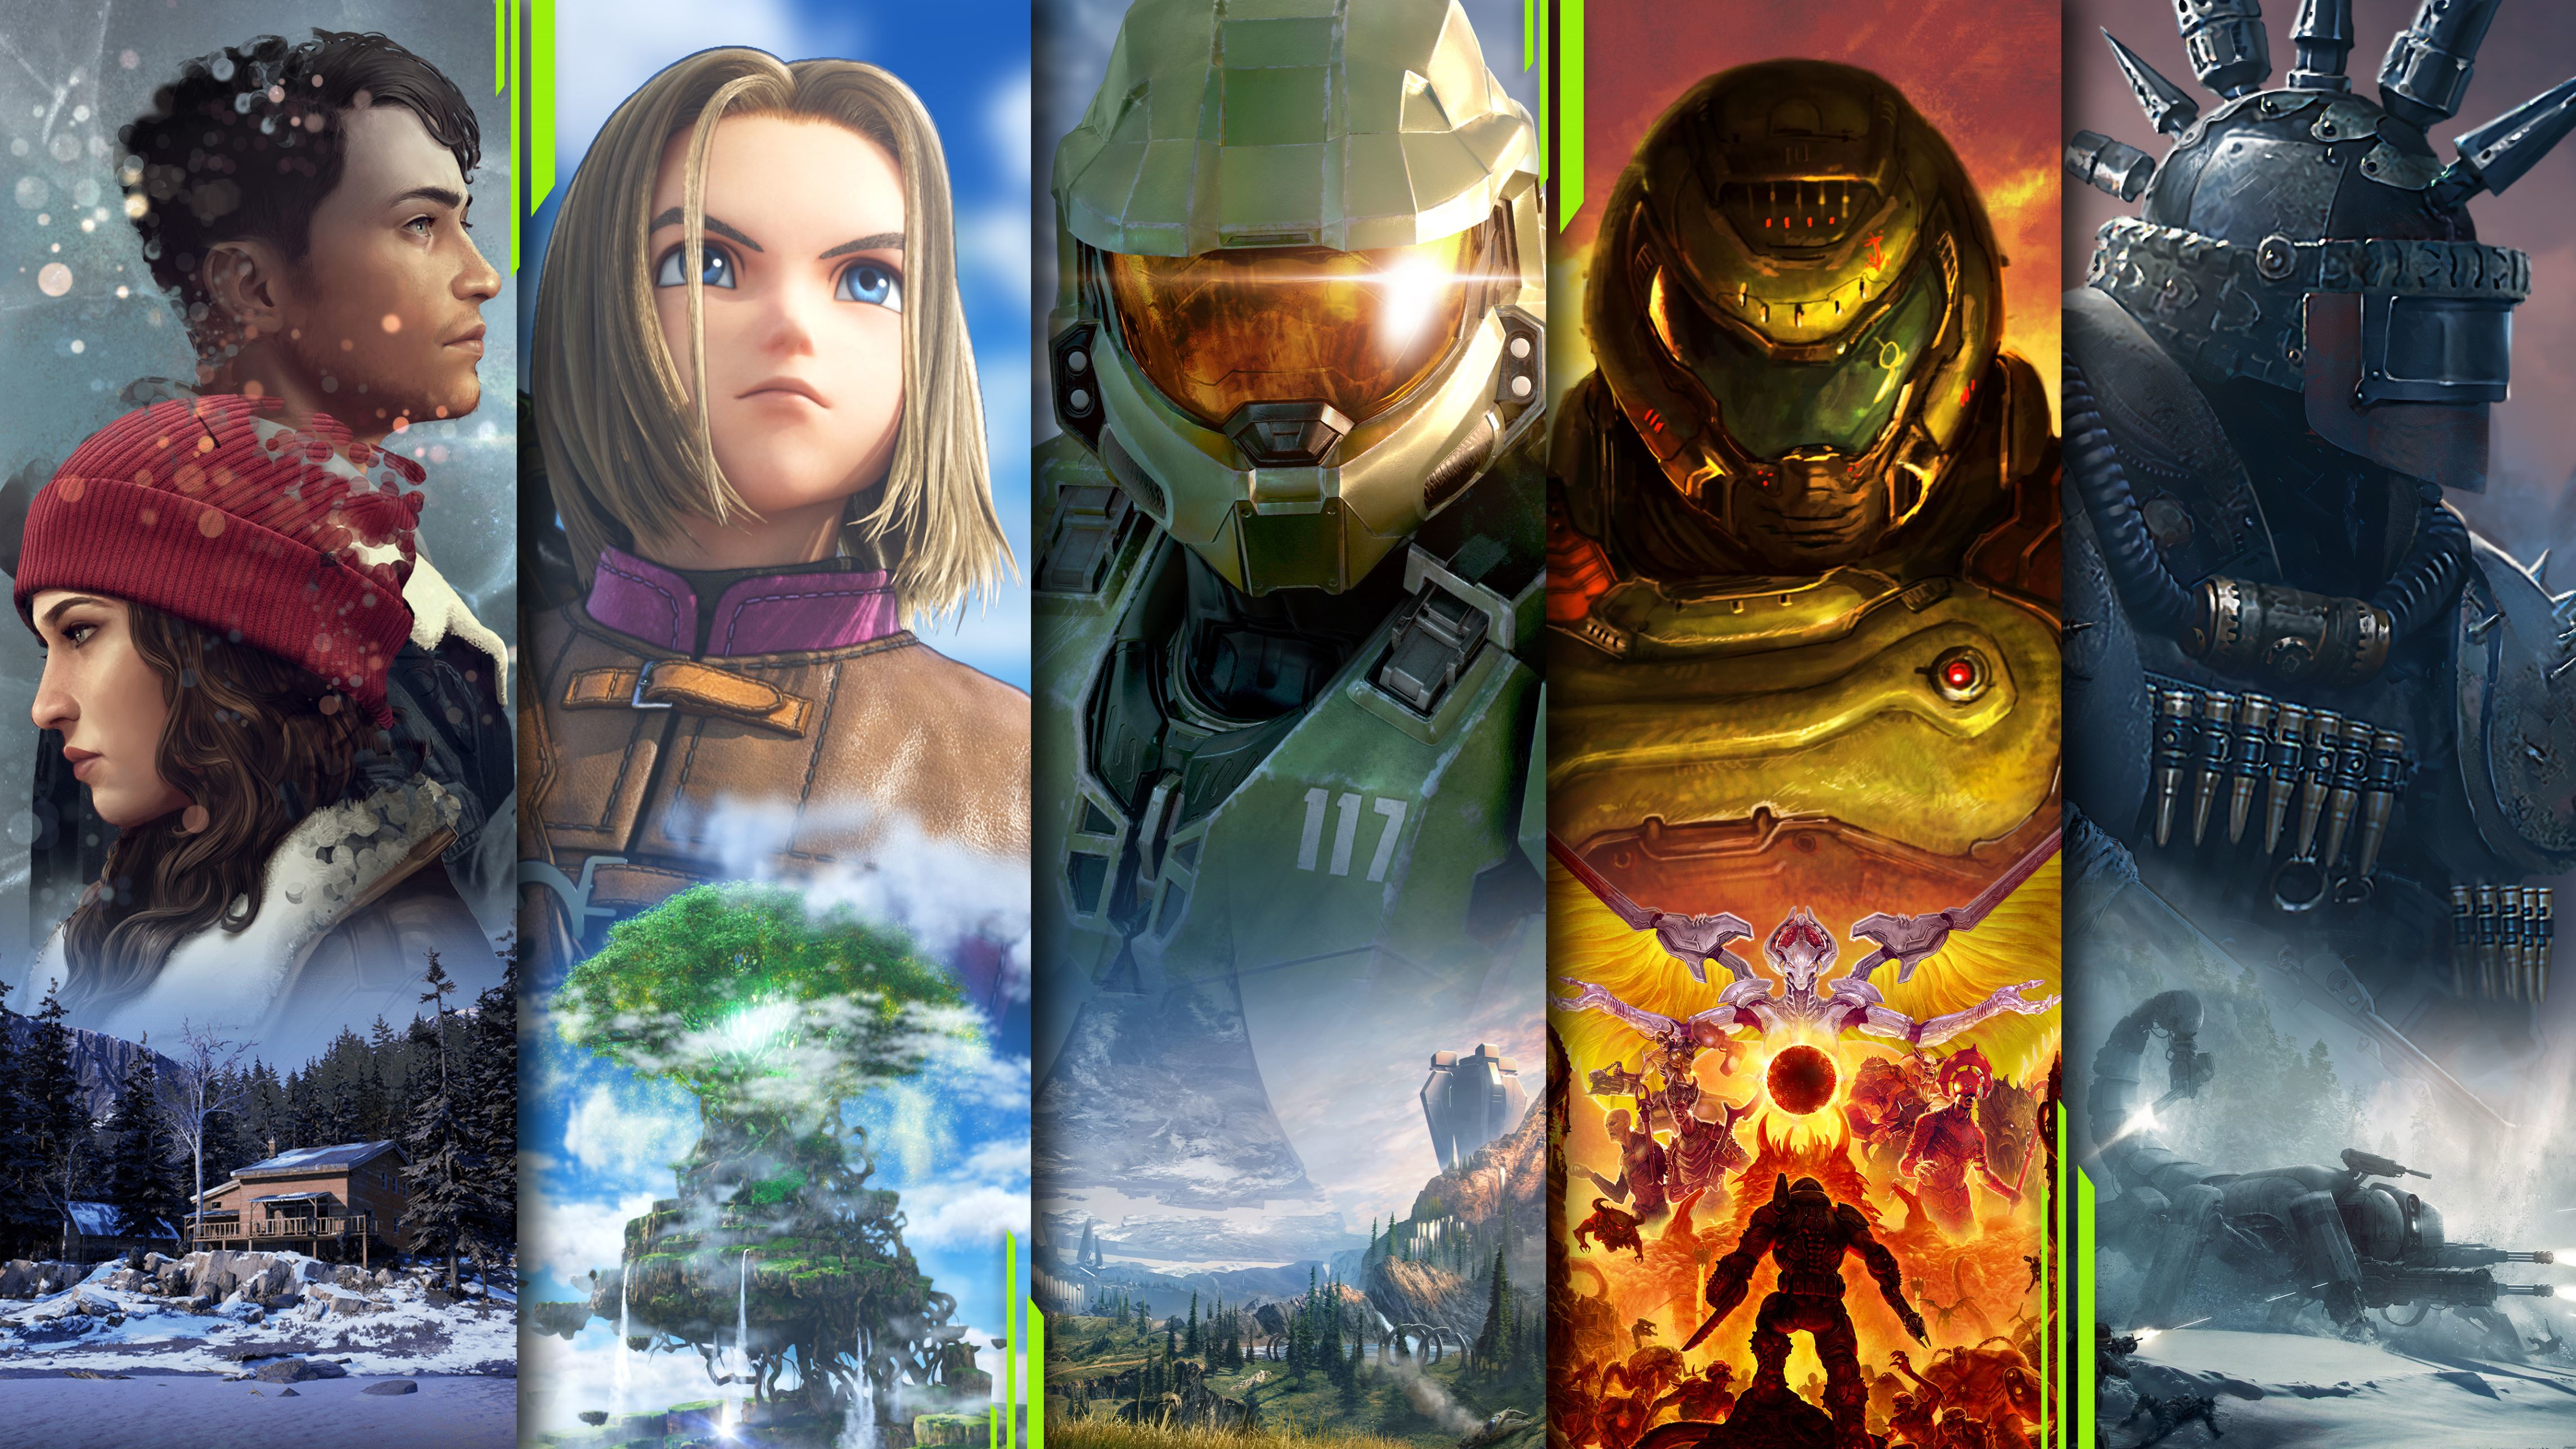 Four video game characters in a row, including Halo's Master Chief and Doom's Doomslayer